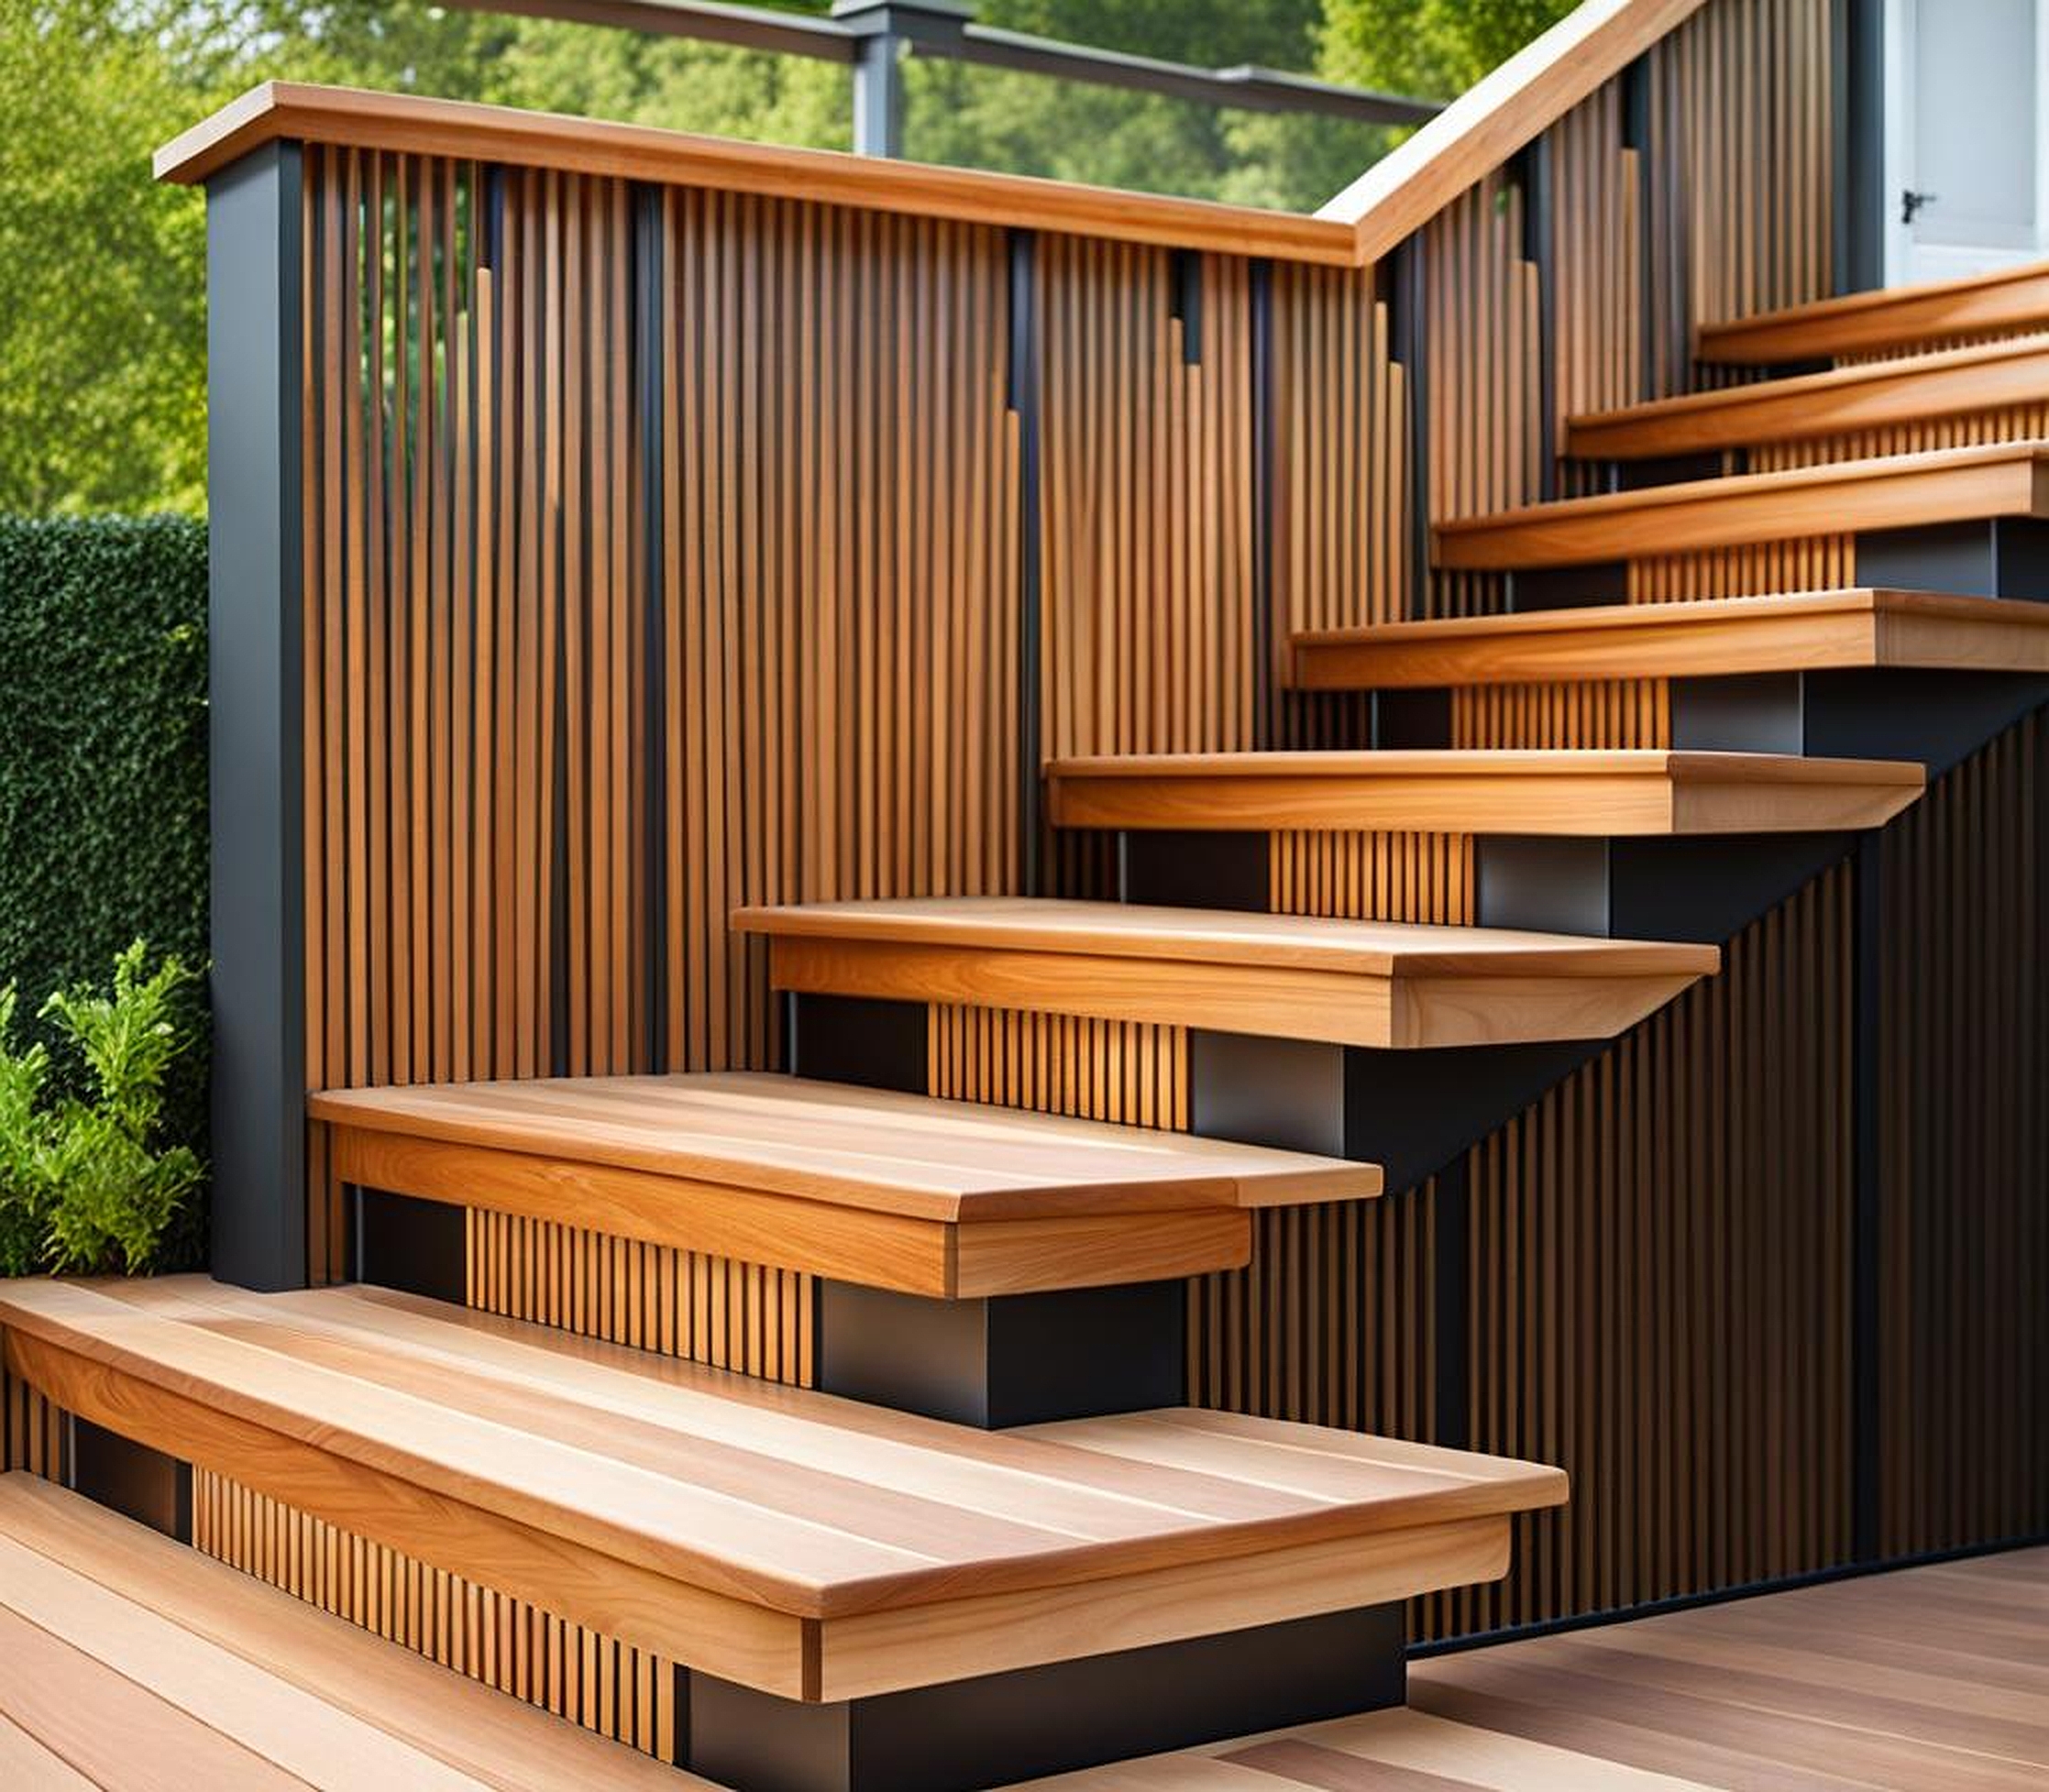 Stair Ideas for Decks with Intricate Railings for Style